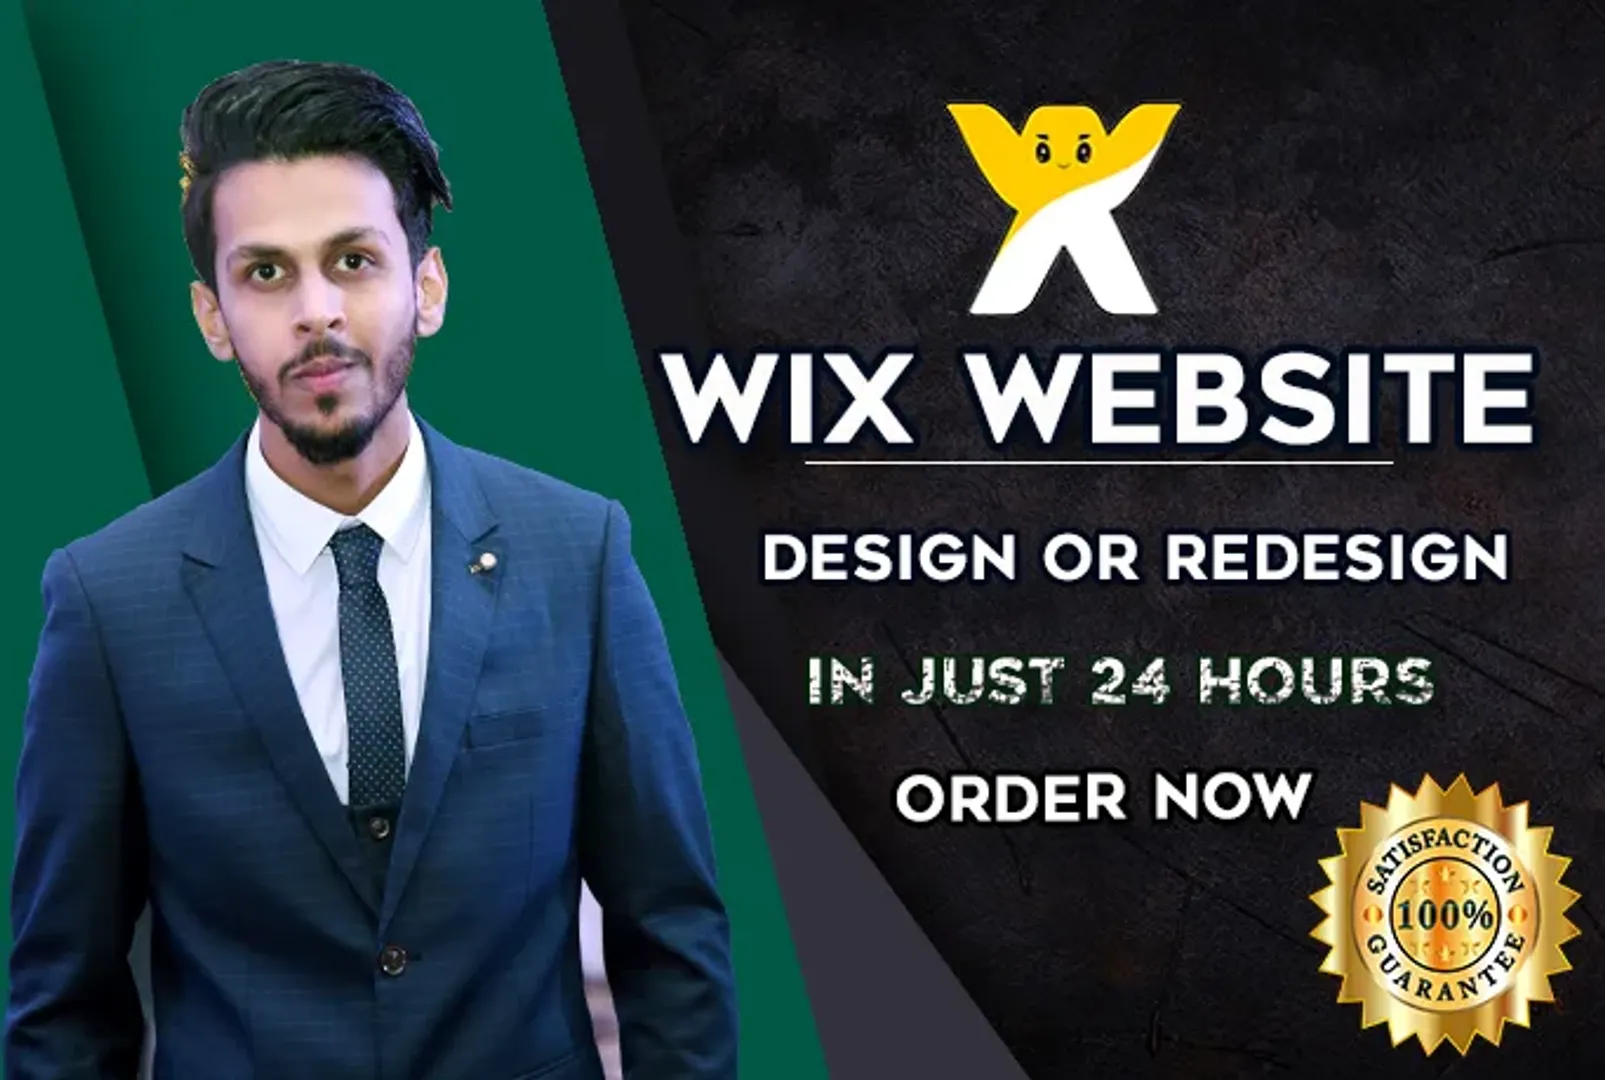 Are You Looking for someone to design your "Wix Website"?
You reached at the right place I will design Wix Website or Redesign Wix Website for You.
I can make a platform for your business that should be responsive and optimized in affordable prices.

Services includes:
Build Wix Website from scratch
Redesign Wix website
Add Features to Your Wix Site
Wix E-commerce Store
Wix Onpage SEO
Minimal Design
Responsive Design
Mobile Friendly
Wix Booking
Wix Events

To order :https://bit.ly/44LIFjD